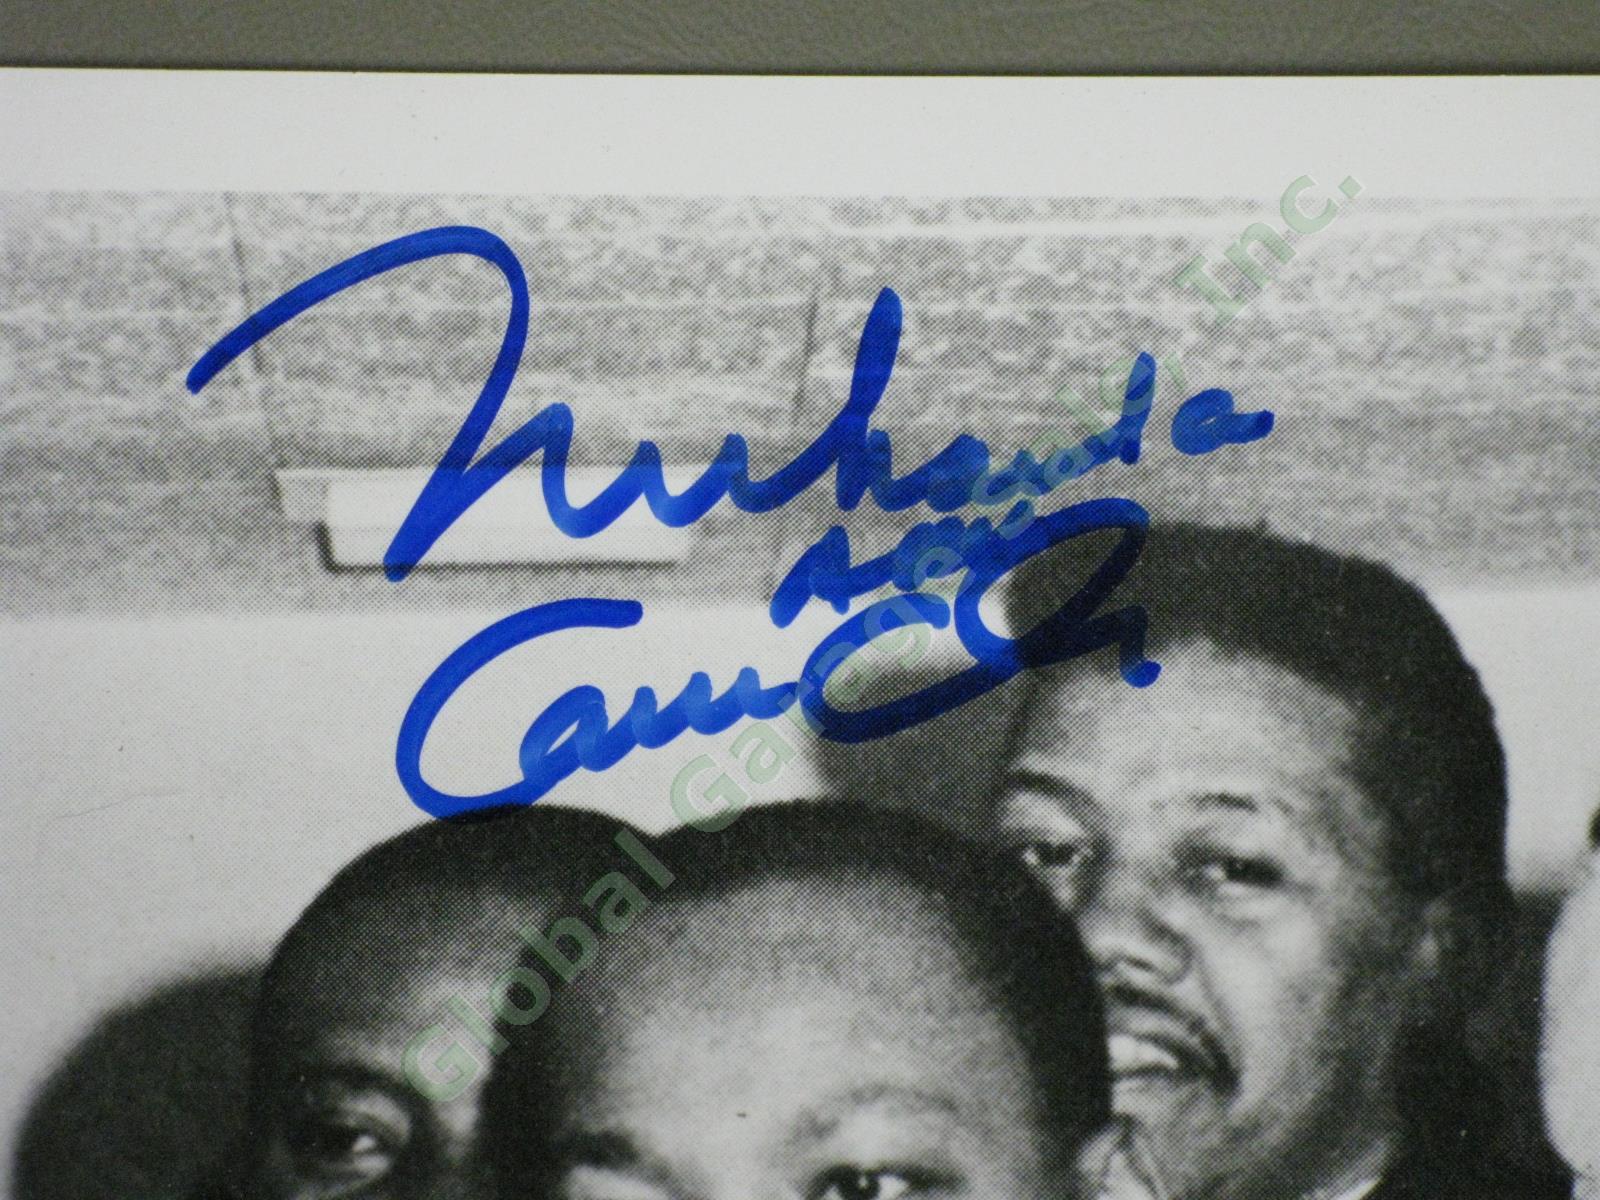 Muhammad Ali AKA Cassius Clay Signed 8"x10" Photo With Martin Luther King Jr MLK 2